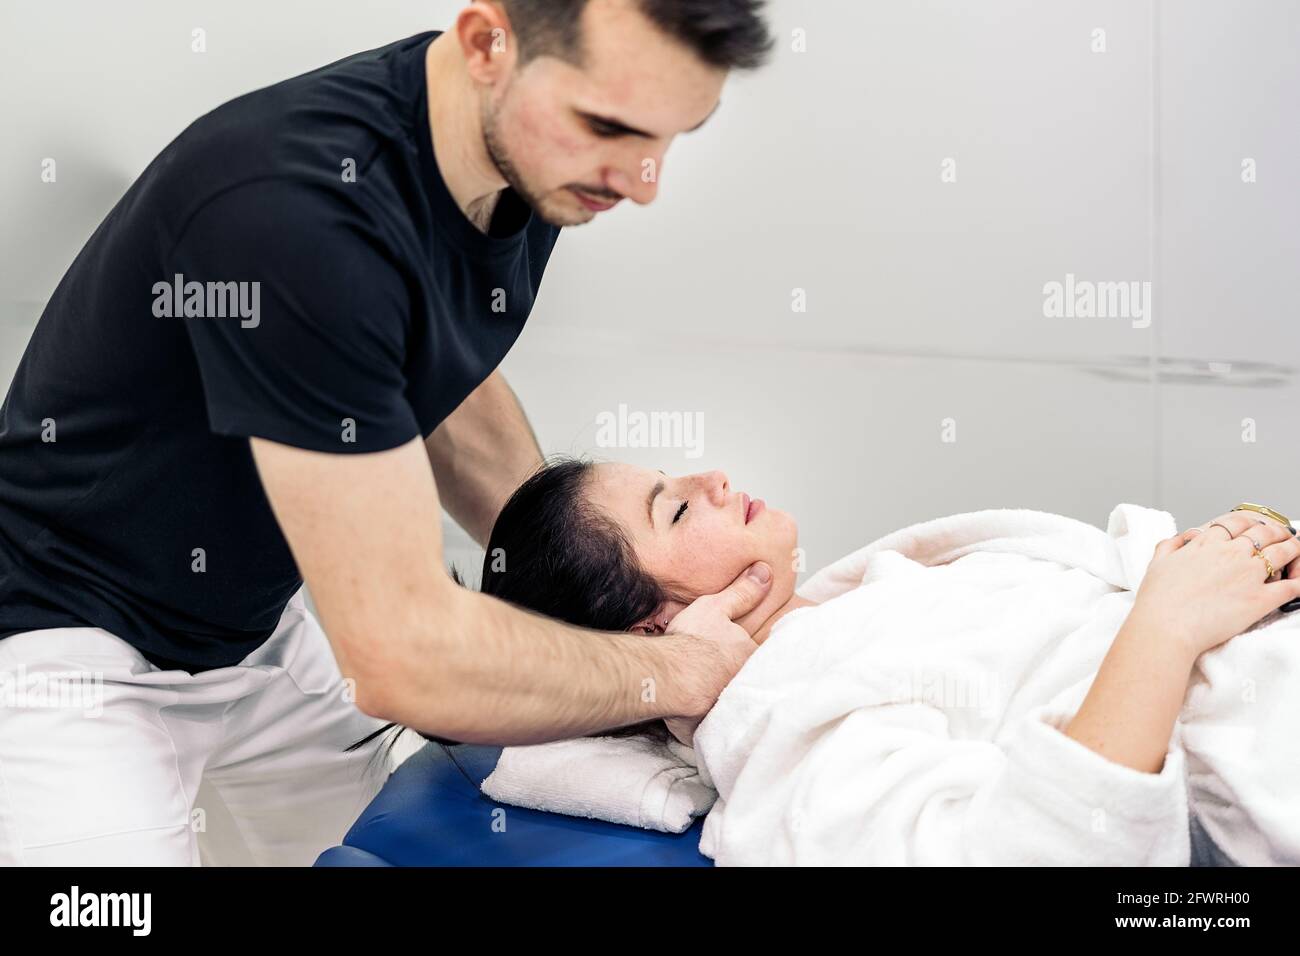 Male physiotherapist giving neck massage to relaxed woman lying in stretcher. Stock Photo